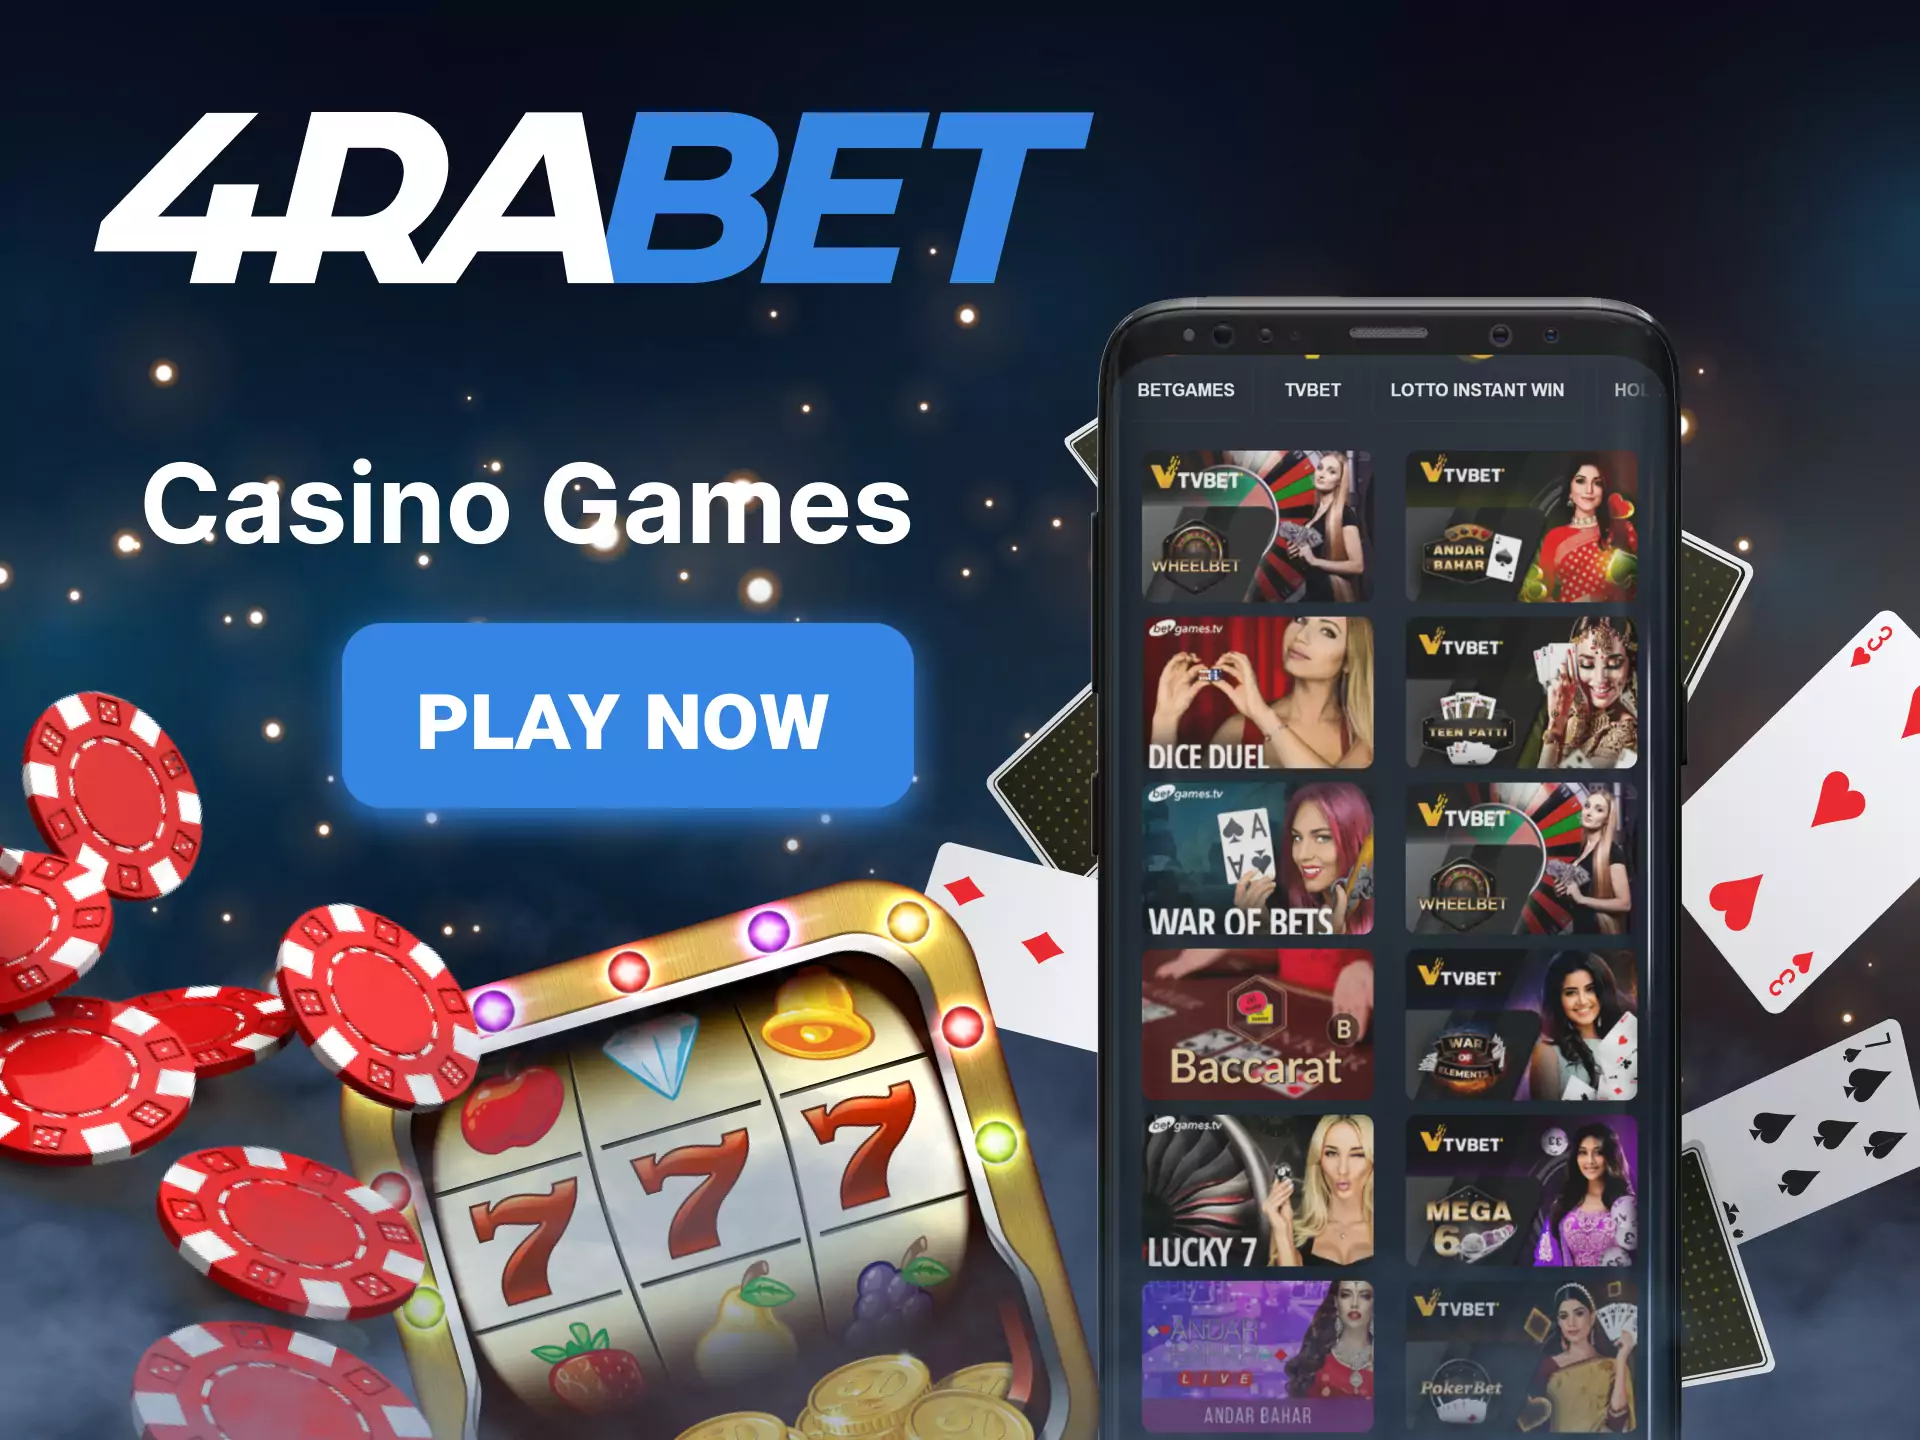 In the mobile app 4rabet play a variety of games at the Casino.